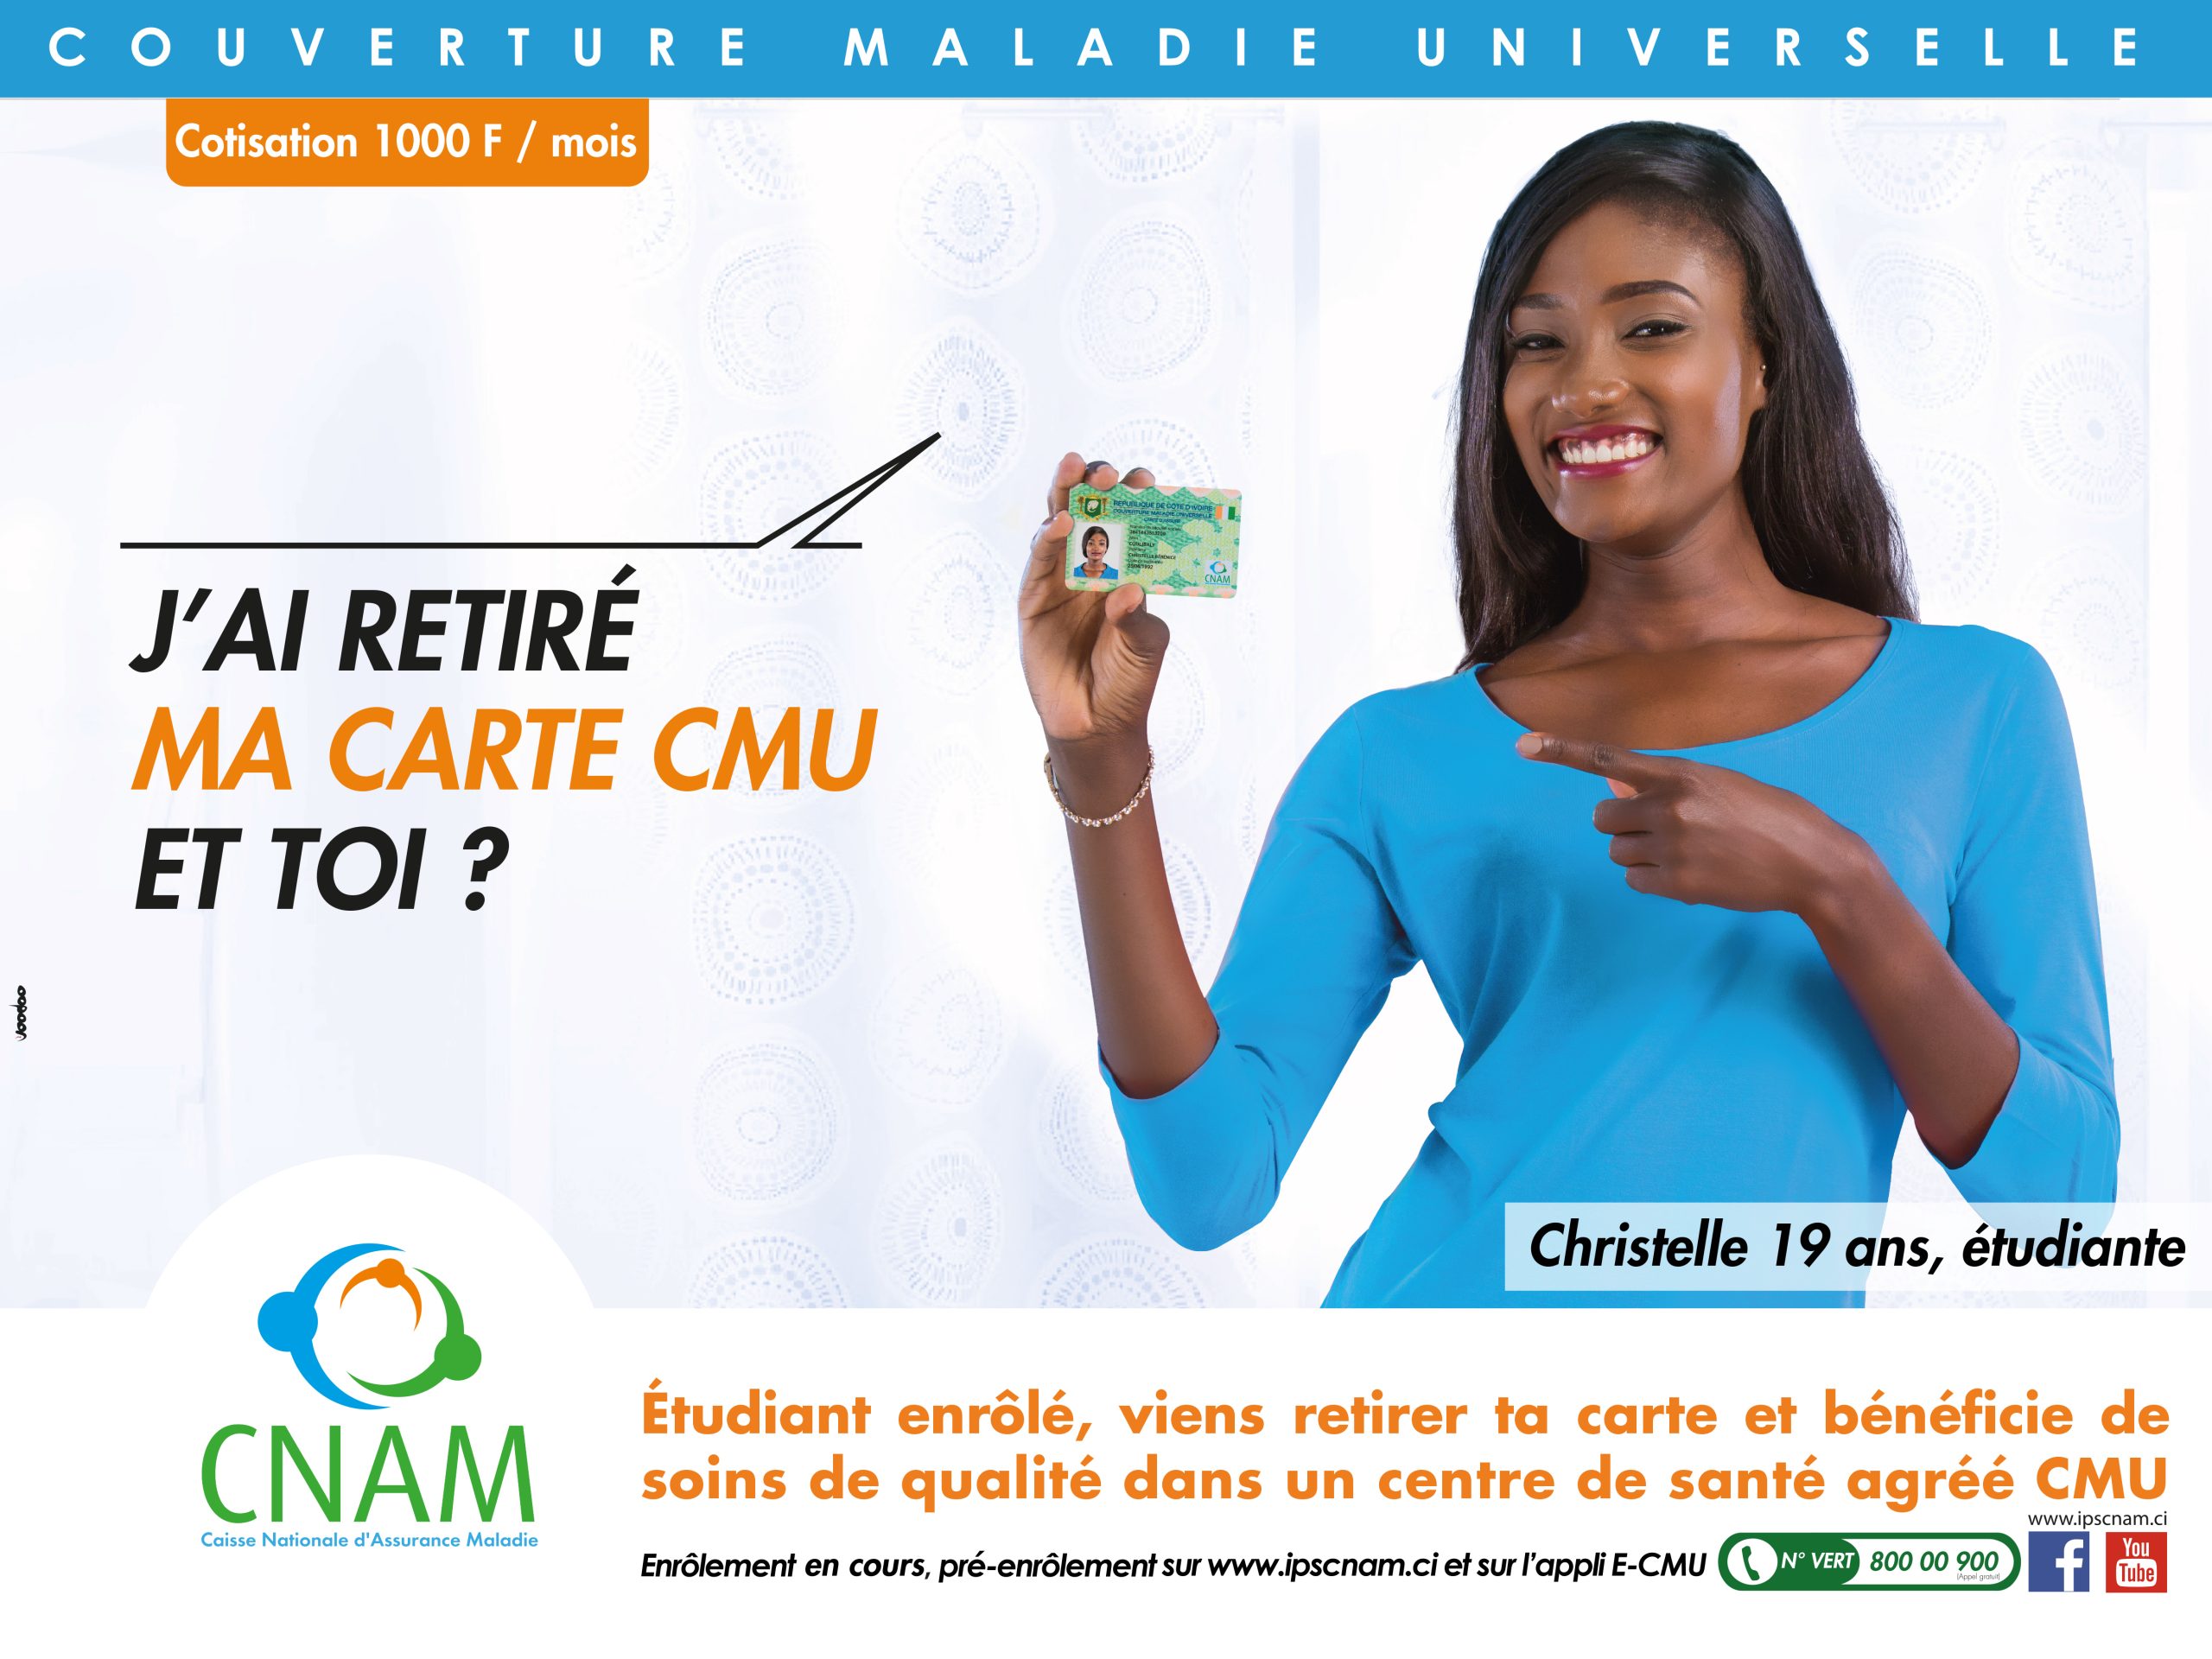 CNAM benefits: an update on the situation in Côte d’Ivoire